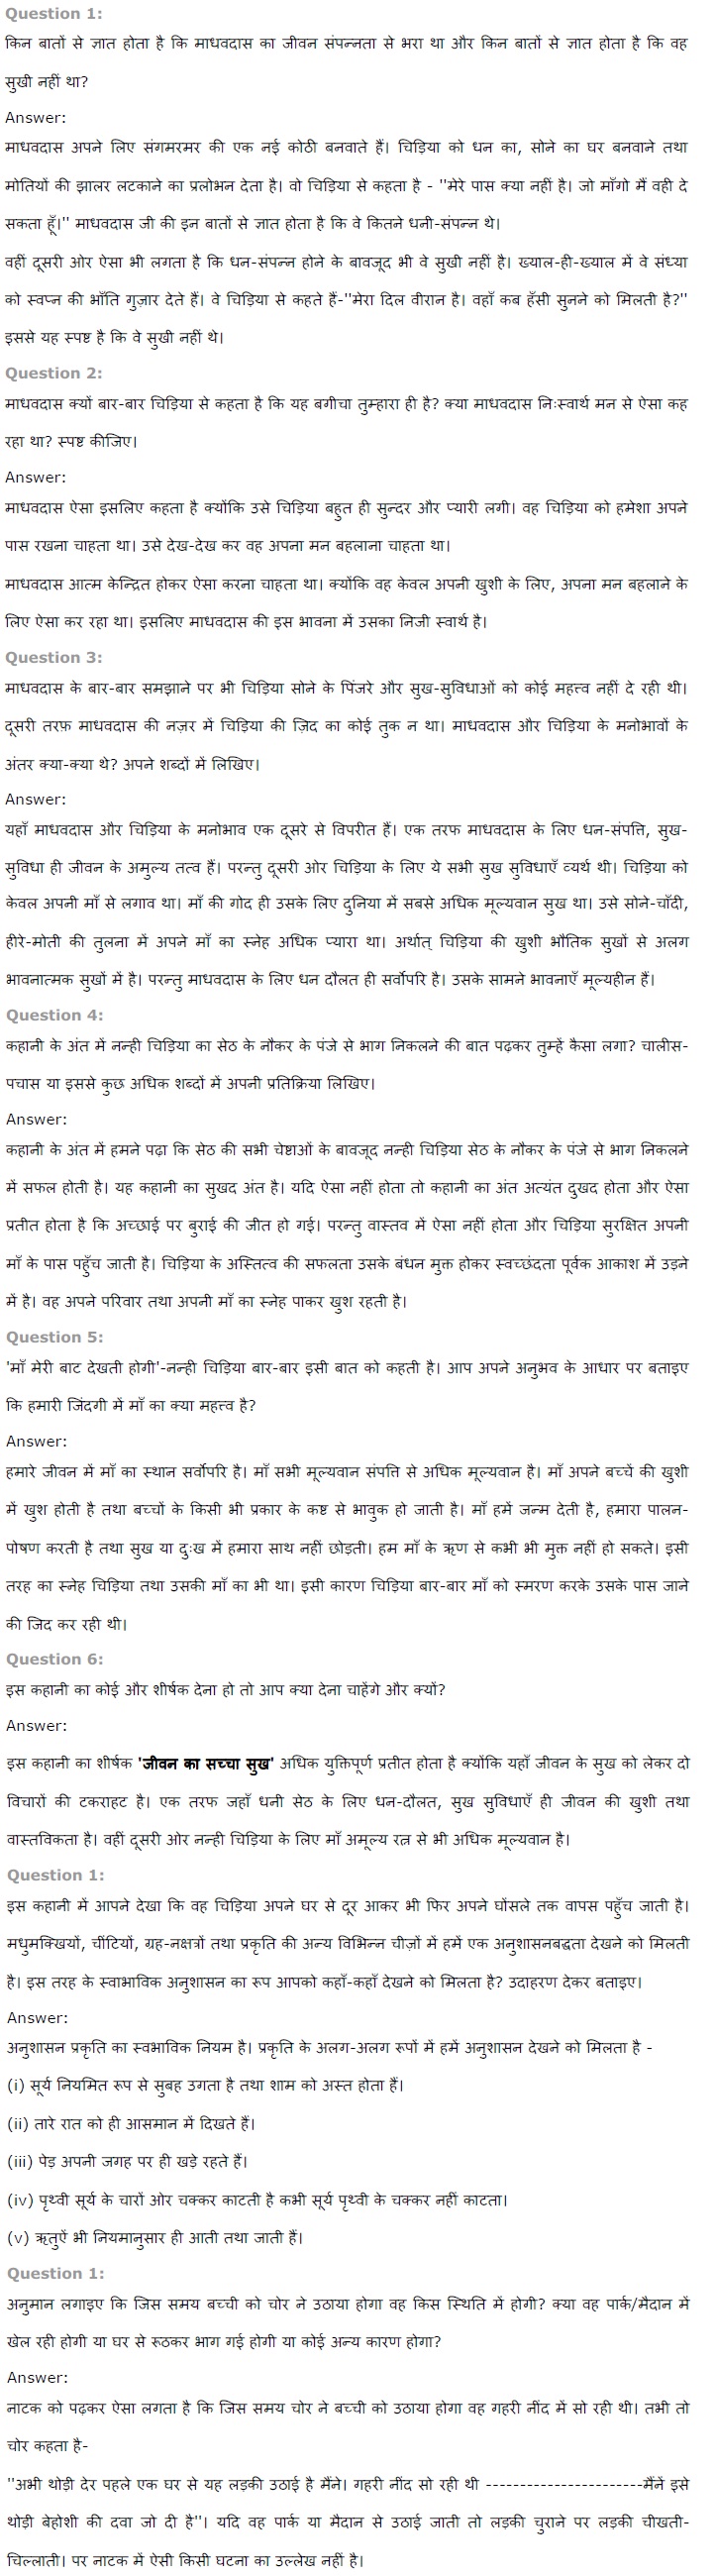 NCERT Solutions for Class 7th Hindi Chapter 9 चिड़िया की बच्ची